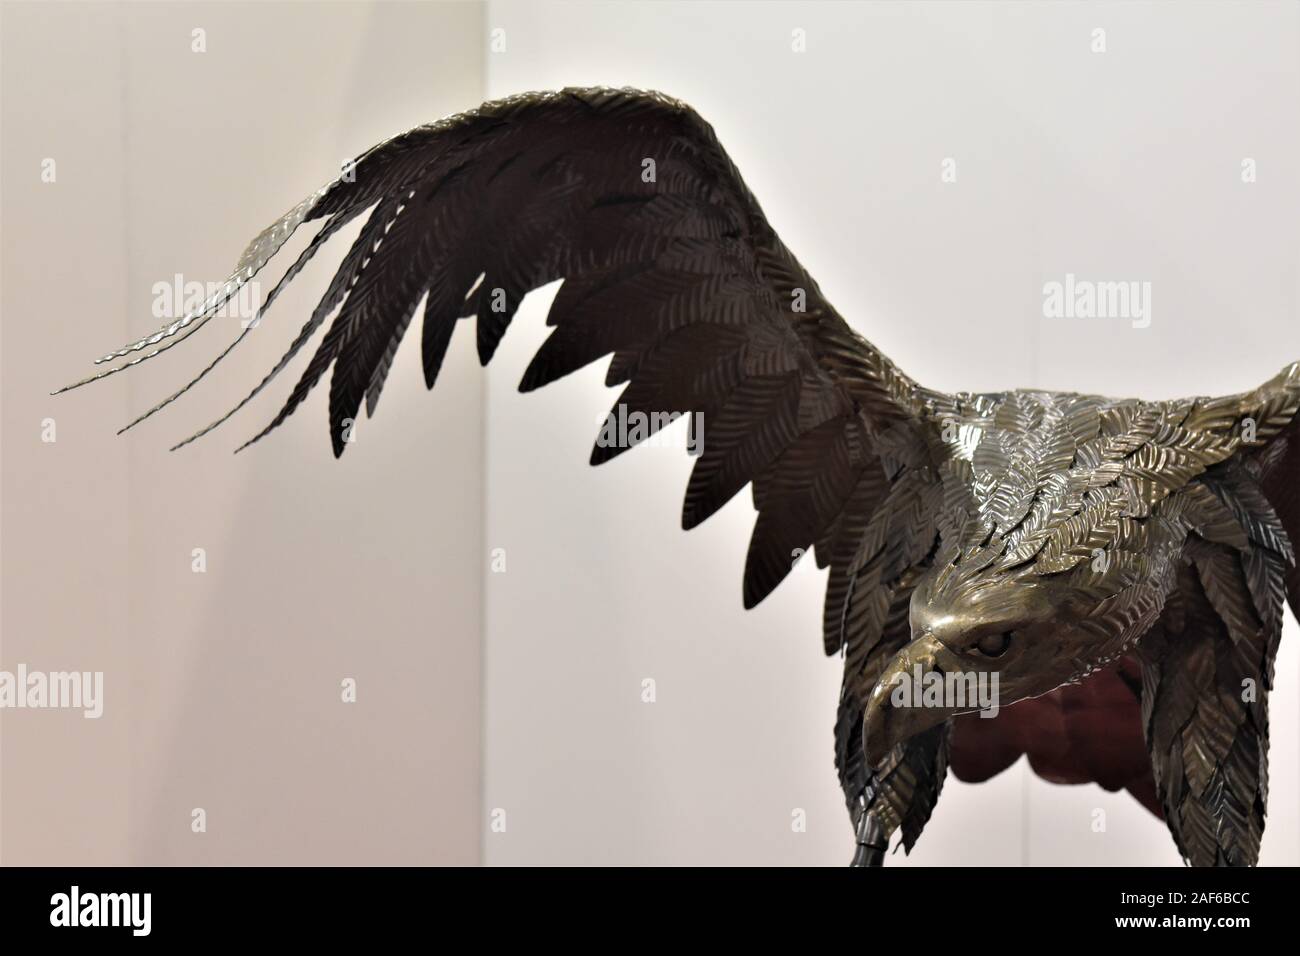 HANDICRAFT AND GASTRONOMY MARKET EXHIBITION.A WROUGHT IRON EAGLE Stock Photo